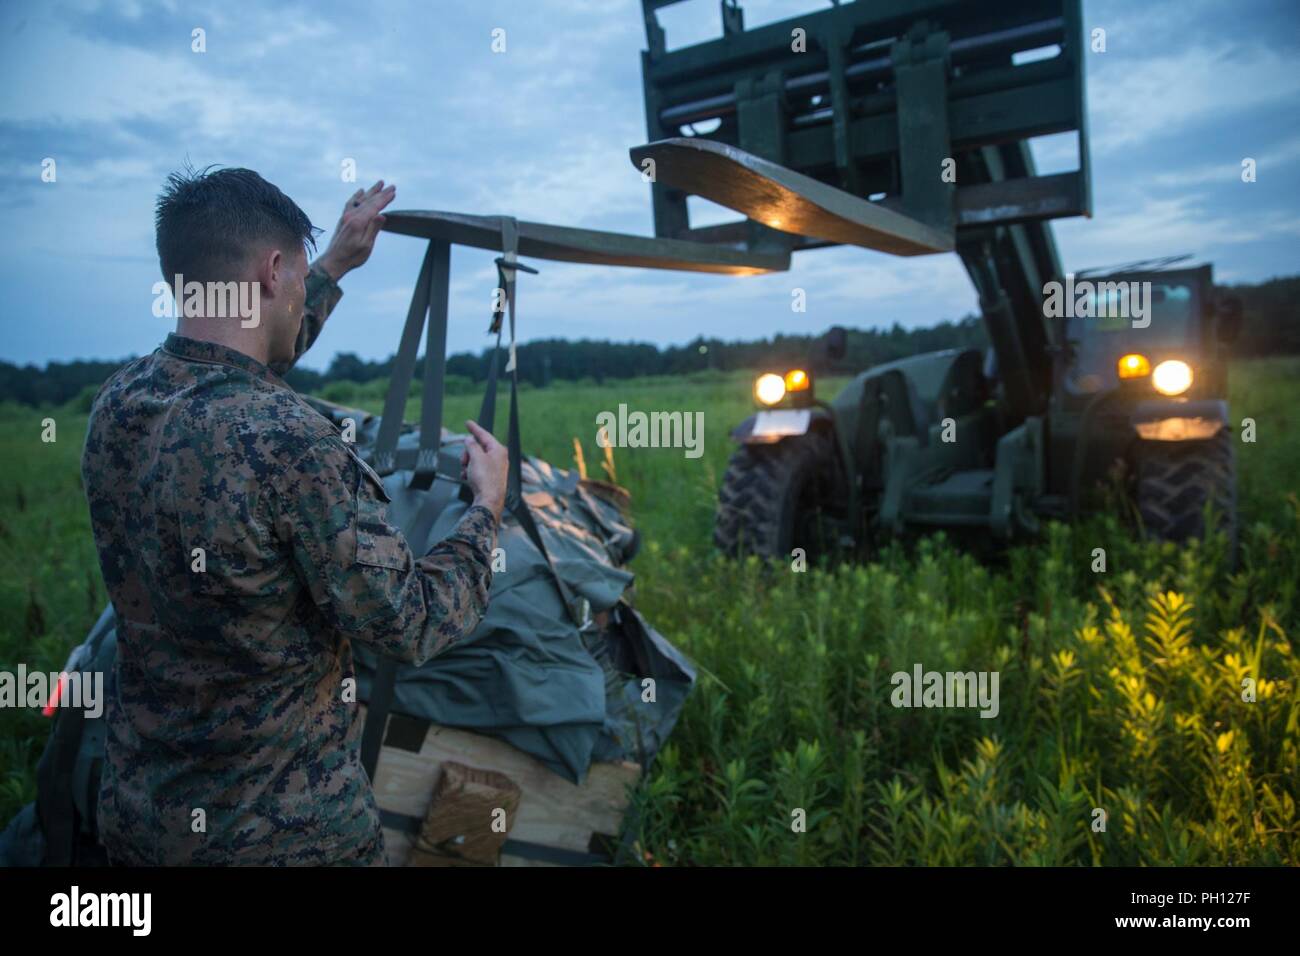 U.S. Marine Corps Staff Sgt. William Ressler, with Landing Support Company, 2nd Transportation Battalion, 2nd Marine Logistics Group, load a joint precision air delivery system onto an extendable boom forklift truck on Camp Lejeune, N.C., June 21, 2018. LS Company assessed the capabilities and limitations of the joint precision air delivery system, a global positioning satellite enhanced autonomous air resupply package, in an effort to automate and modernize the Marine Corps. Stock Photo